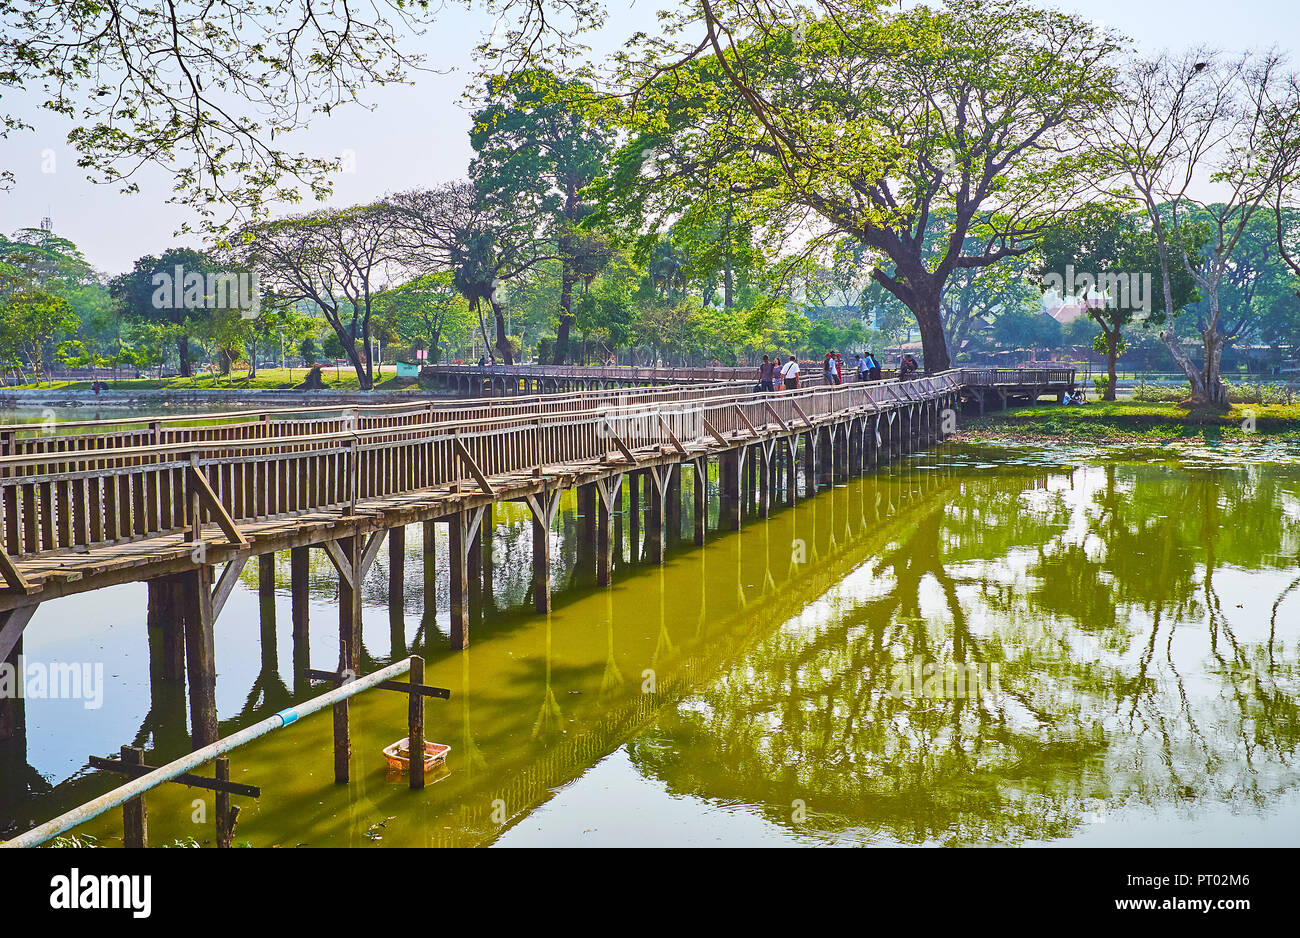 YANGON, MYANMAR - FEBRUARY 27, 2018: The Kandawgyi park boasts the system of old wooden bridges, connecting its indented banks and creating perfect wa Stock Photo